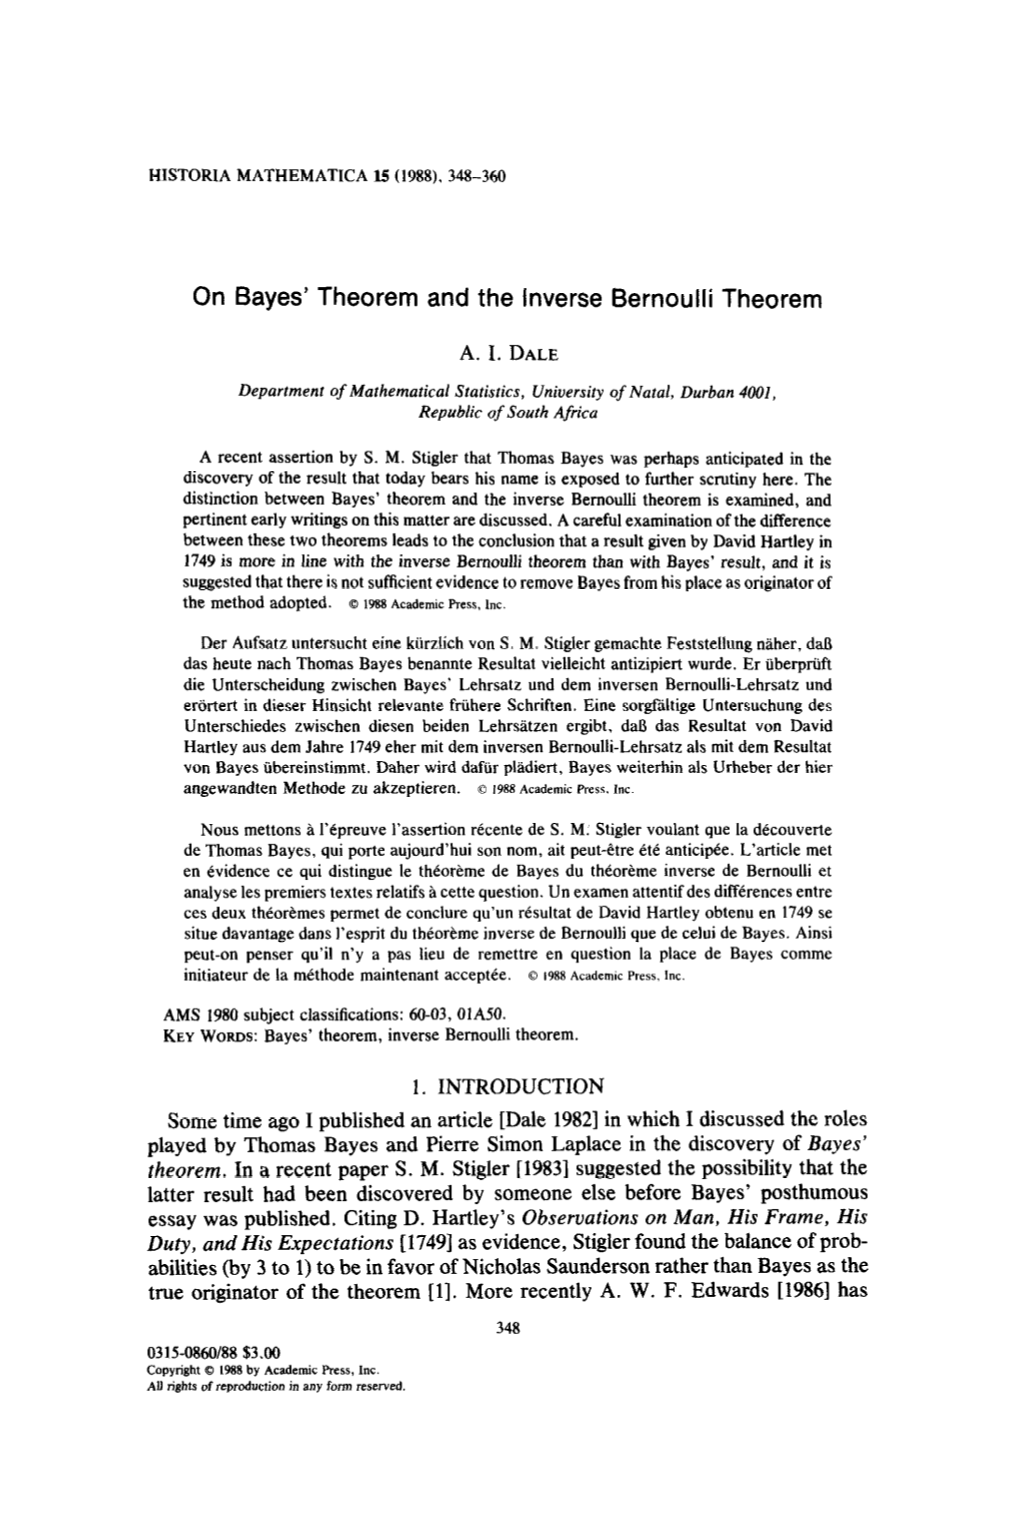 On Bayes' Theorem and the Inverse Bernoulli Theorem